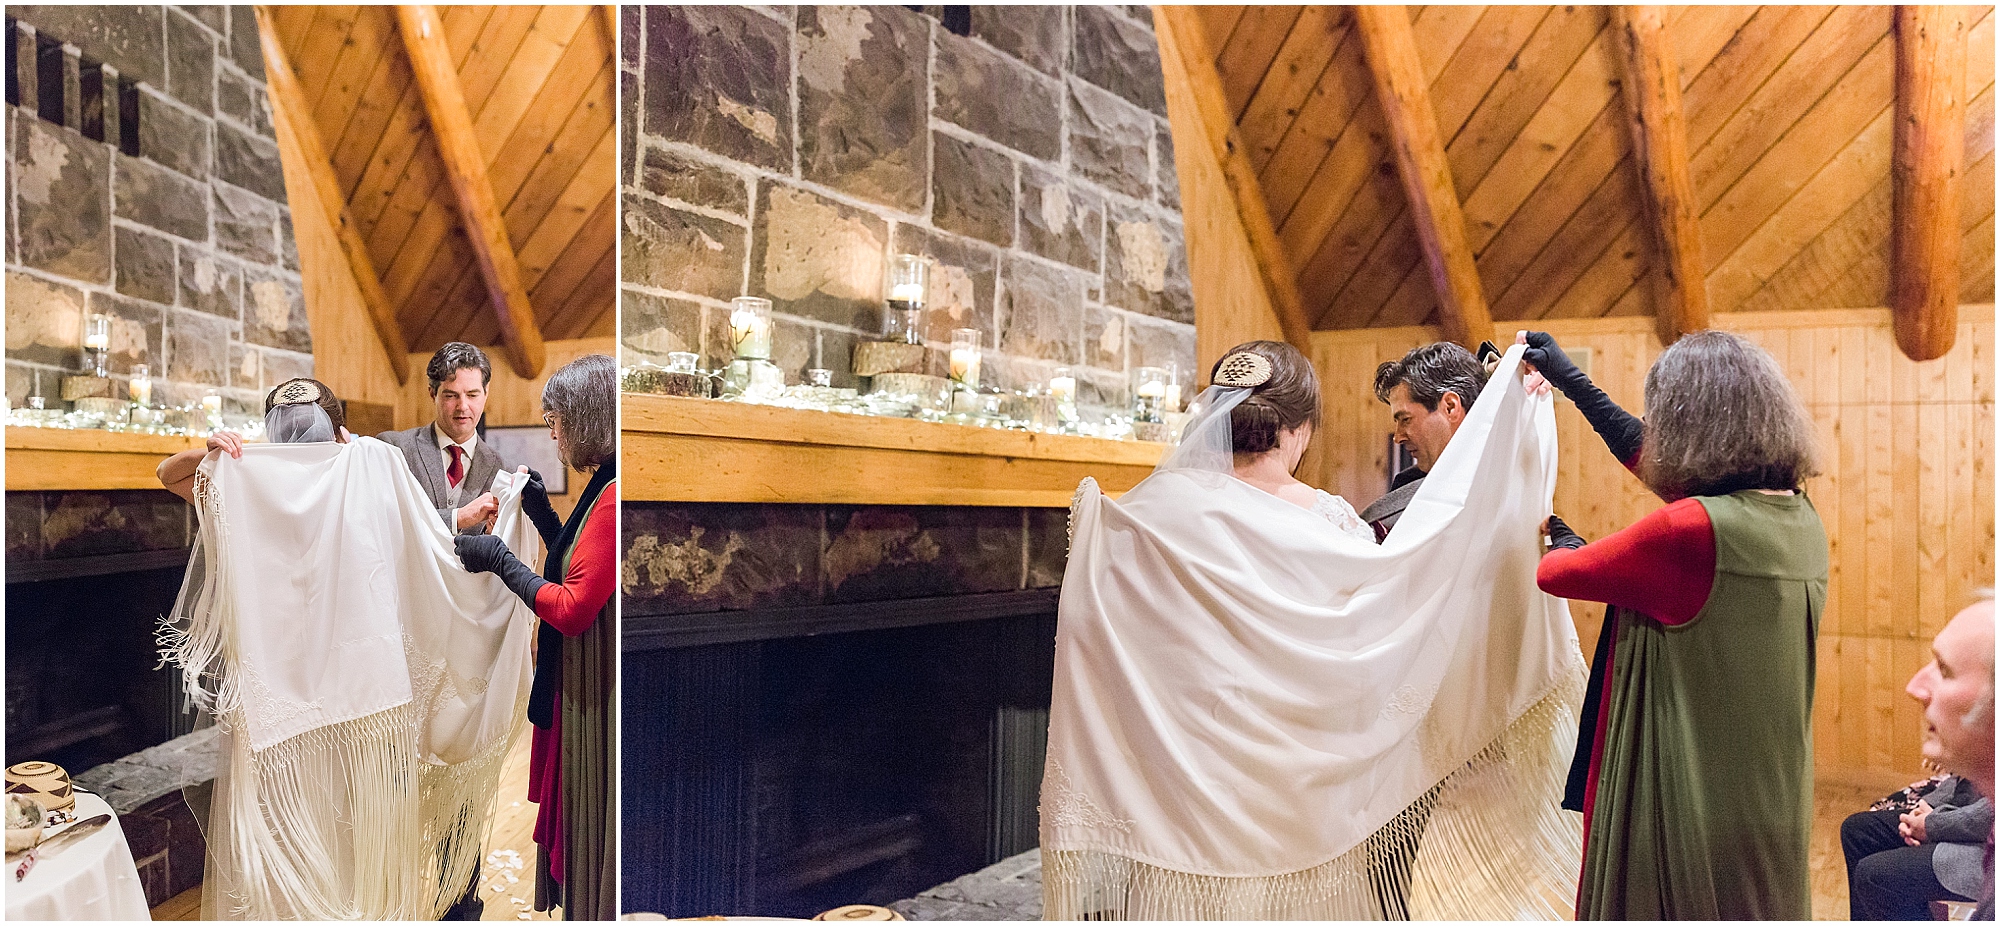 The bride and groom are wrapped in a prayer shawl incorporating Jewish and Native American traditions during their intimate ceremony at the Fireside Room at their Sunriver Resort winter wedding in Oregon. | Erica Swantek Photography